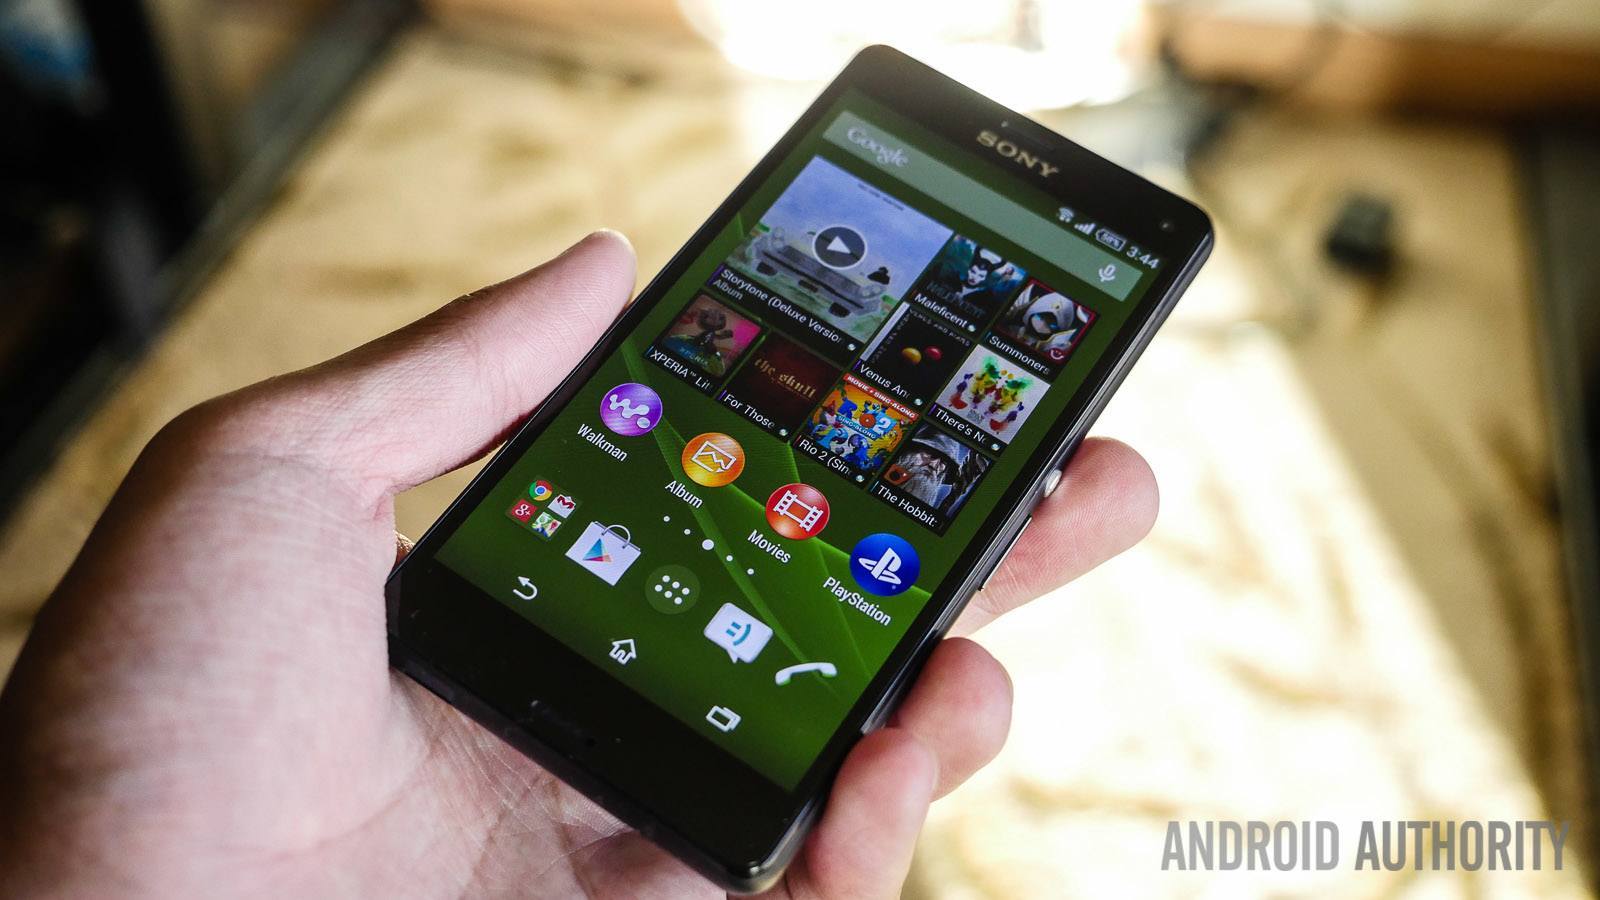 pin Intensief snap Sony Xperia Z3 Compact Review